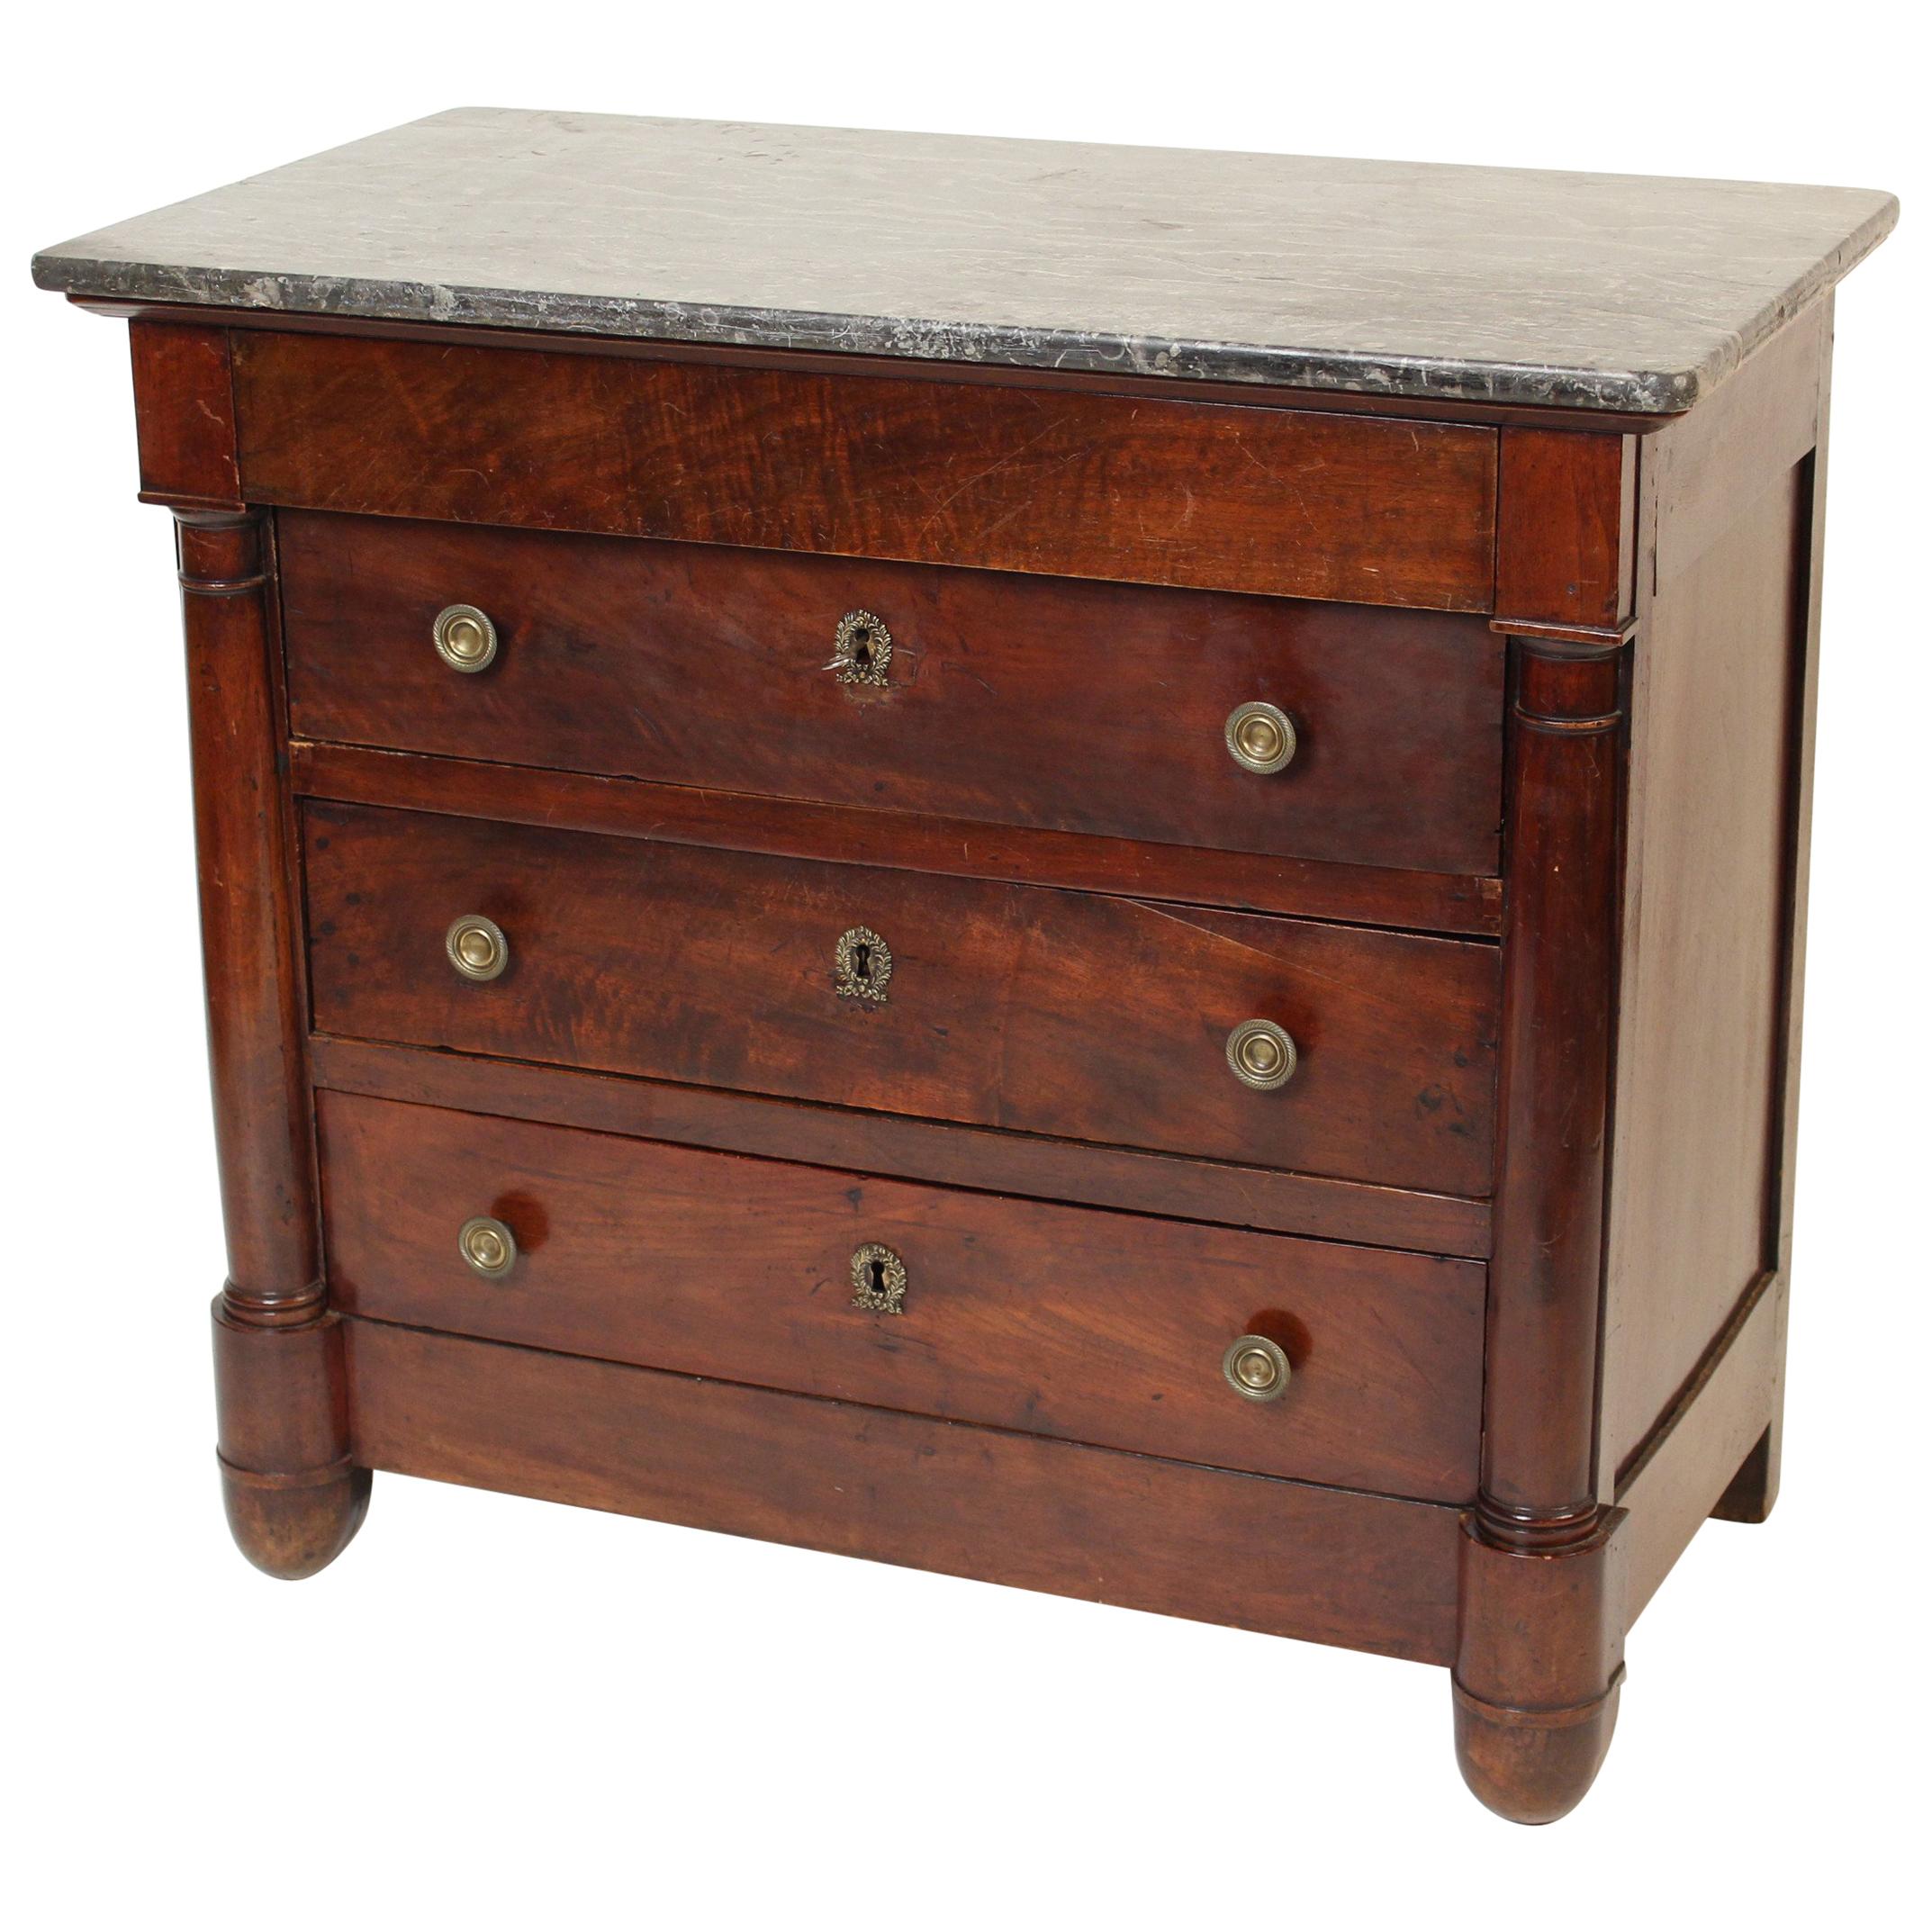 Period Empire Chest of Drawers